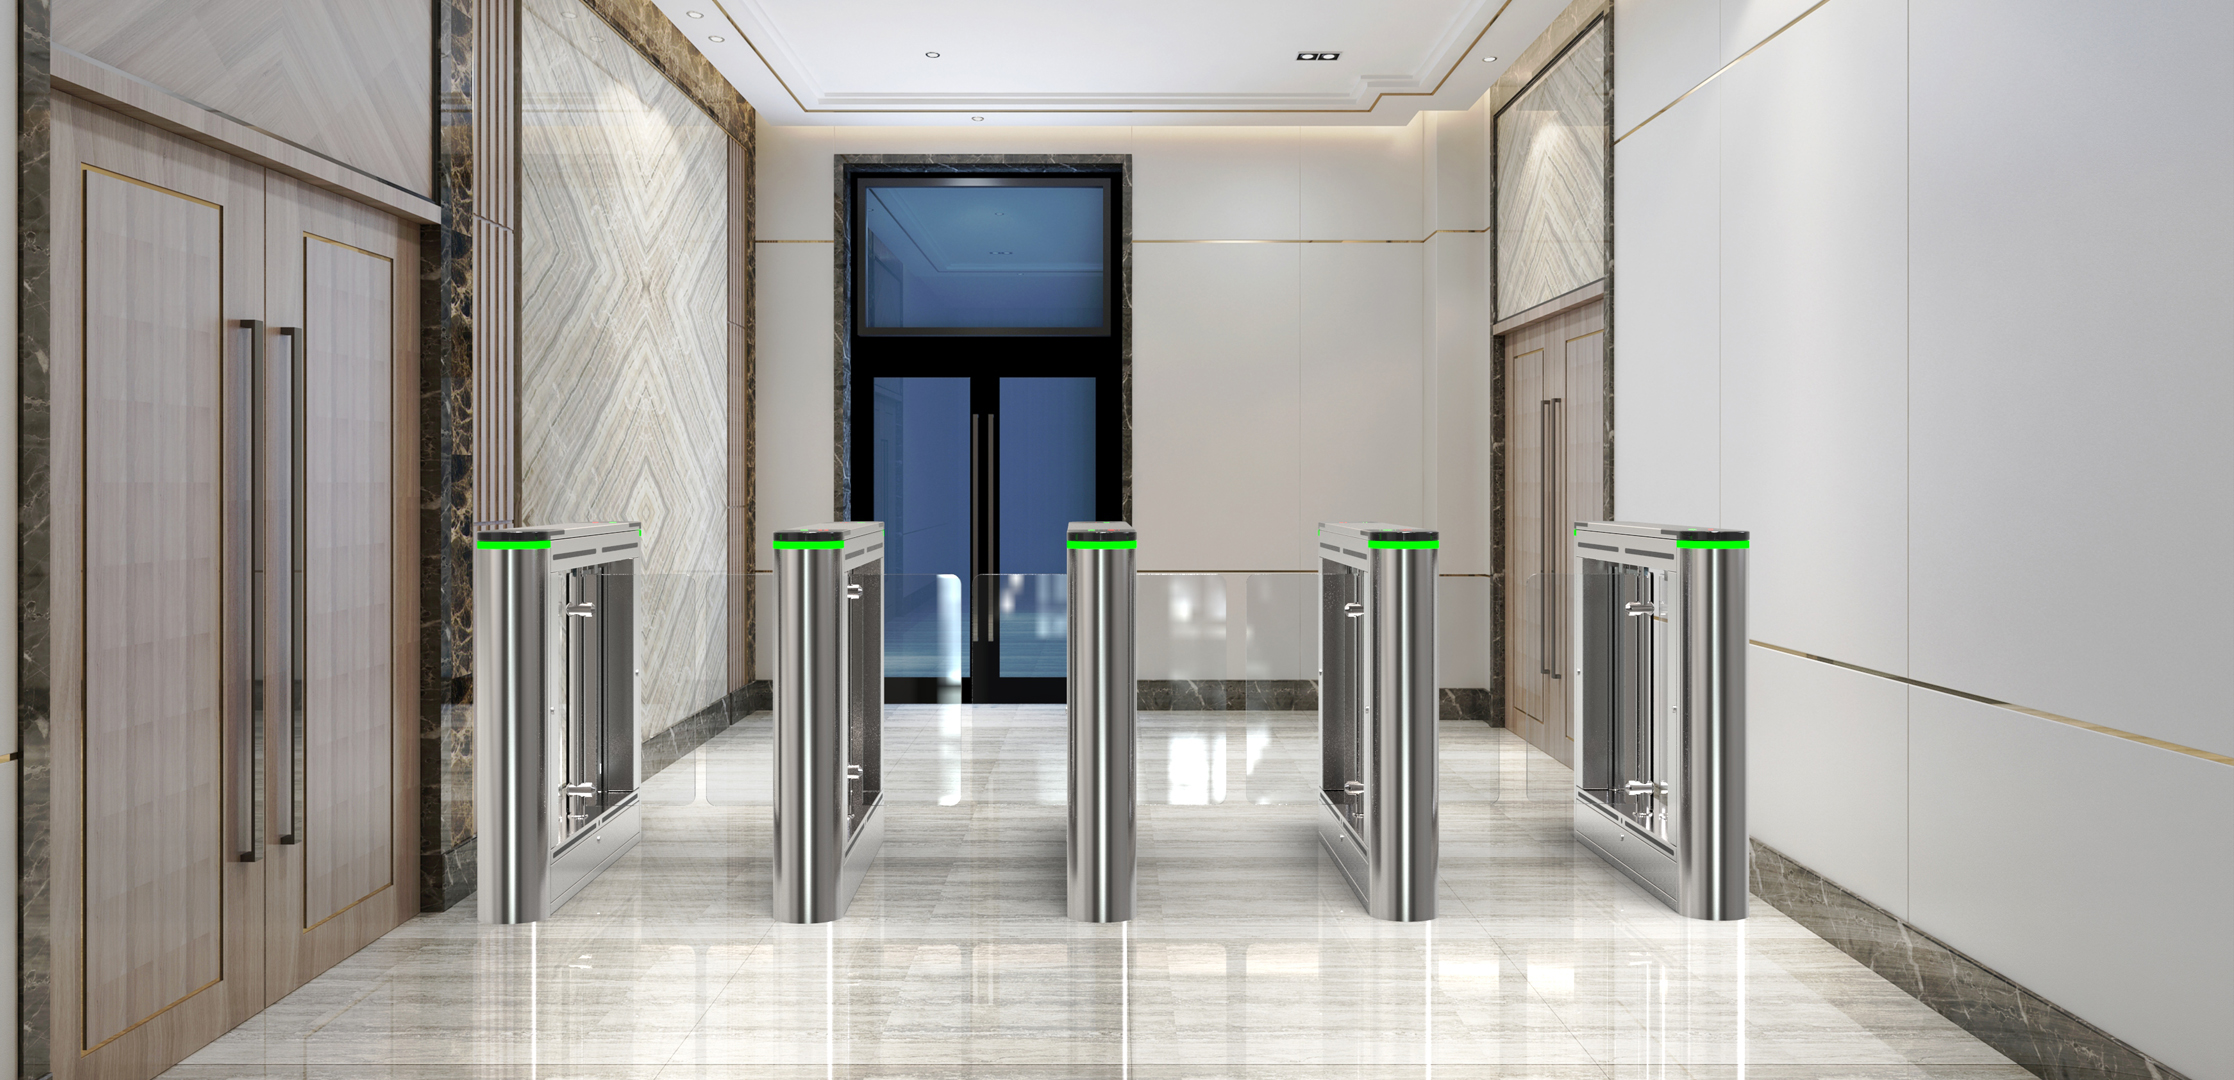 Excelsoo is A leading brand tripod turnstile gate systems manufacturer supplier in China.